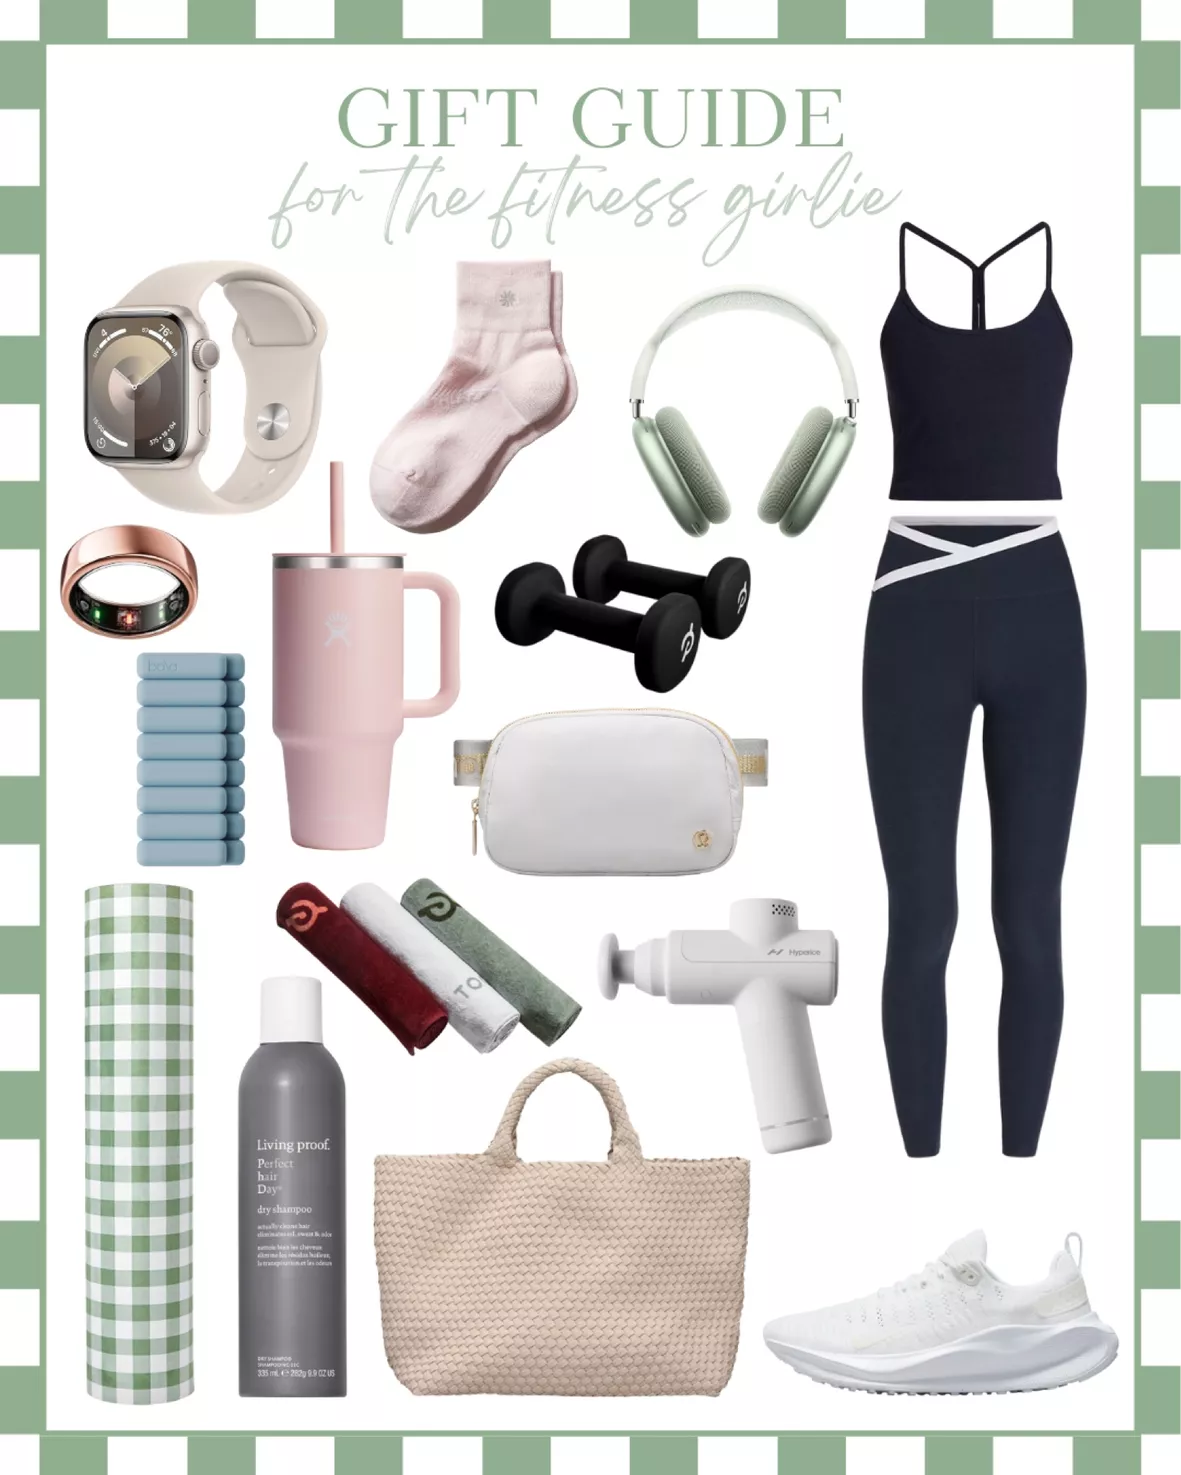 Gifts For The Pilates Enthusiast